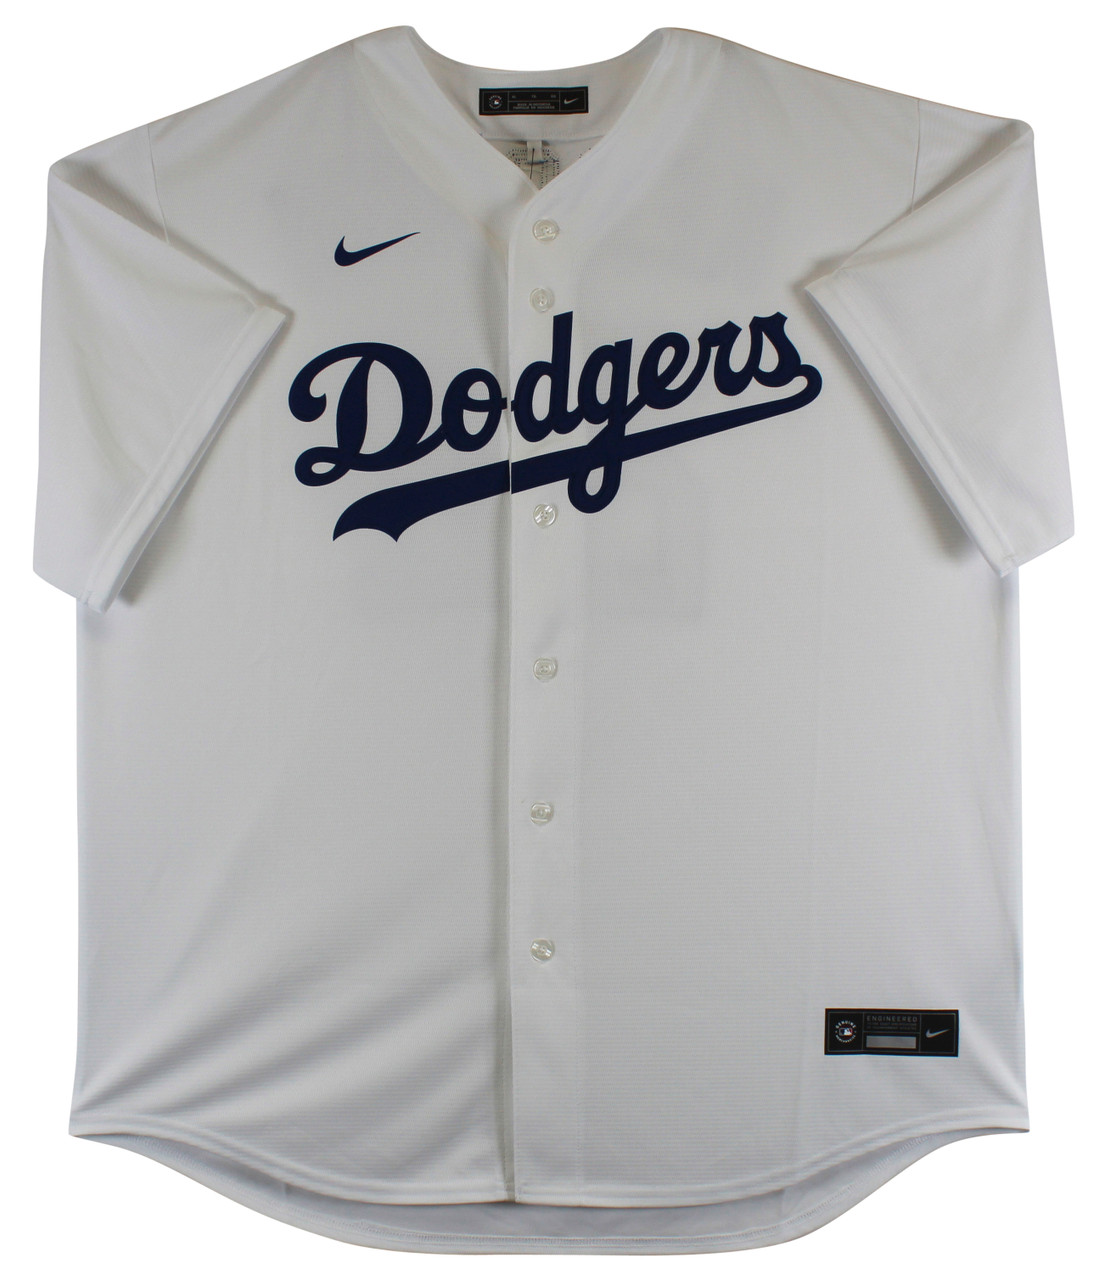 Clayton Kershaw Autographed 2020 World Series Jersey